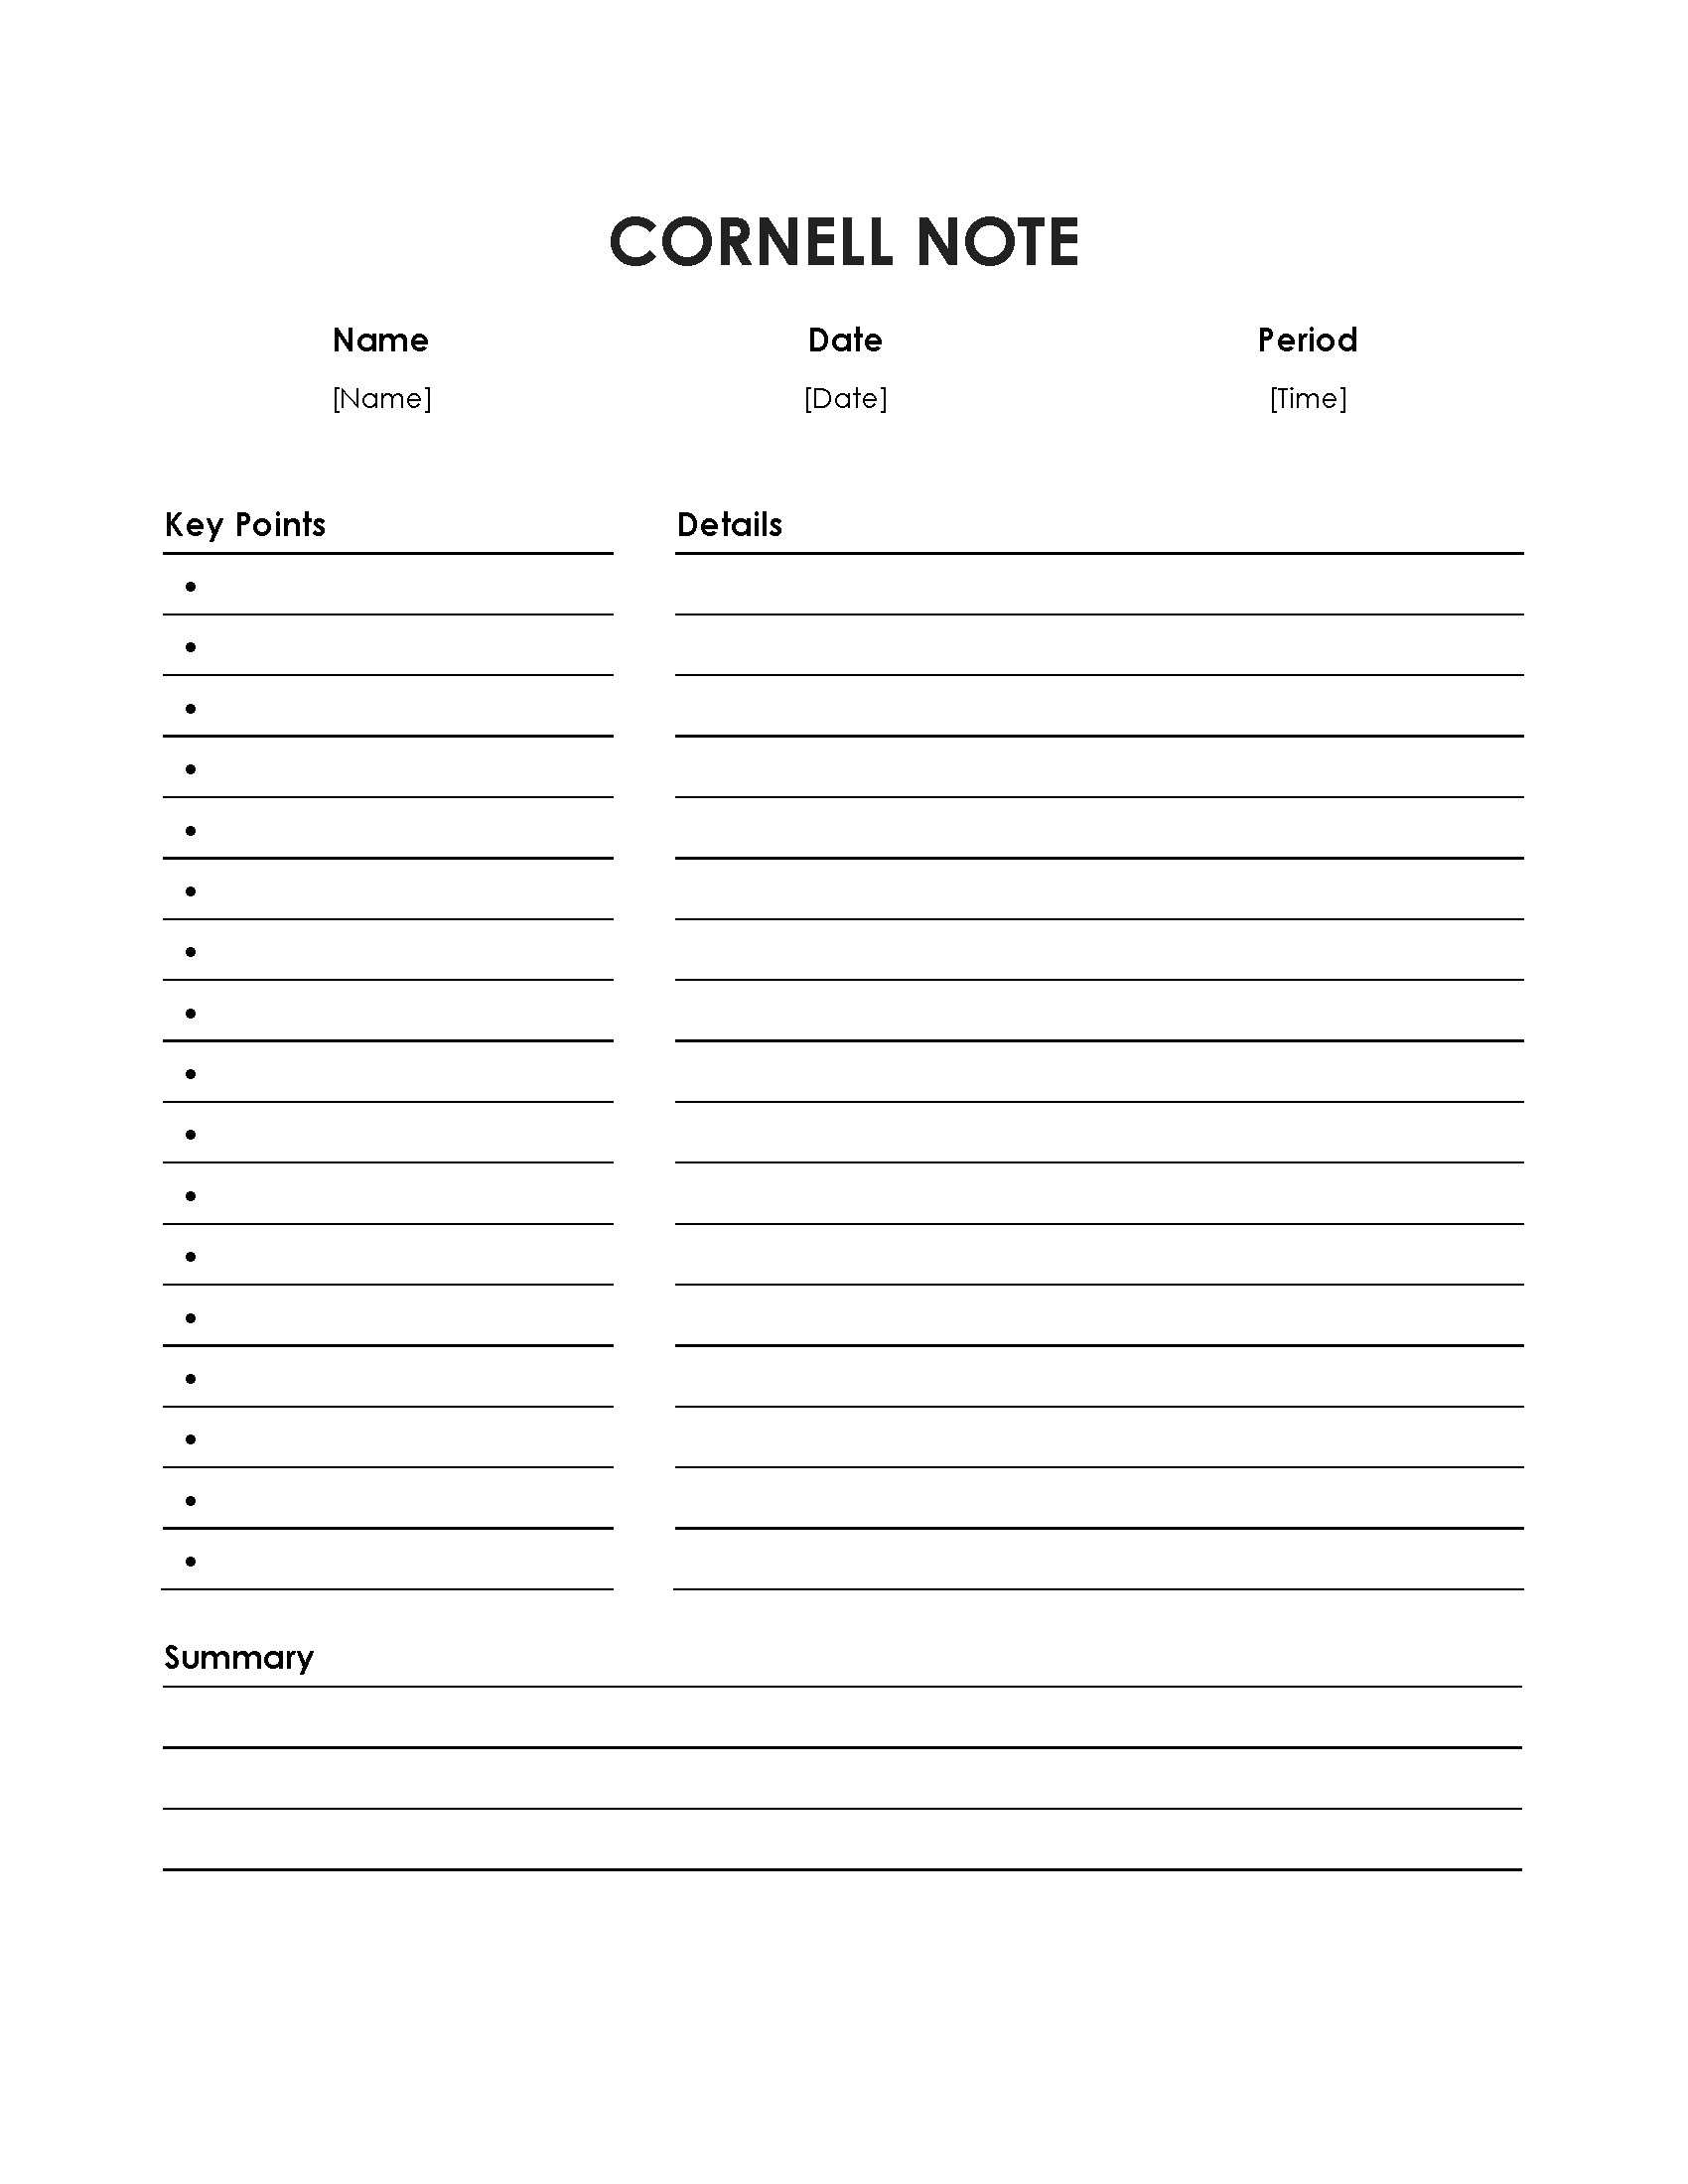 Cornell Notes Template Microsoft Word DocTemplates